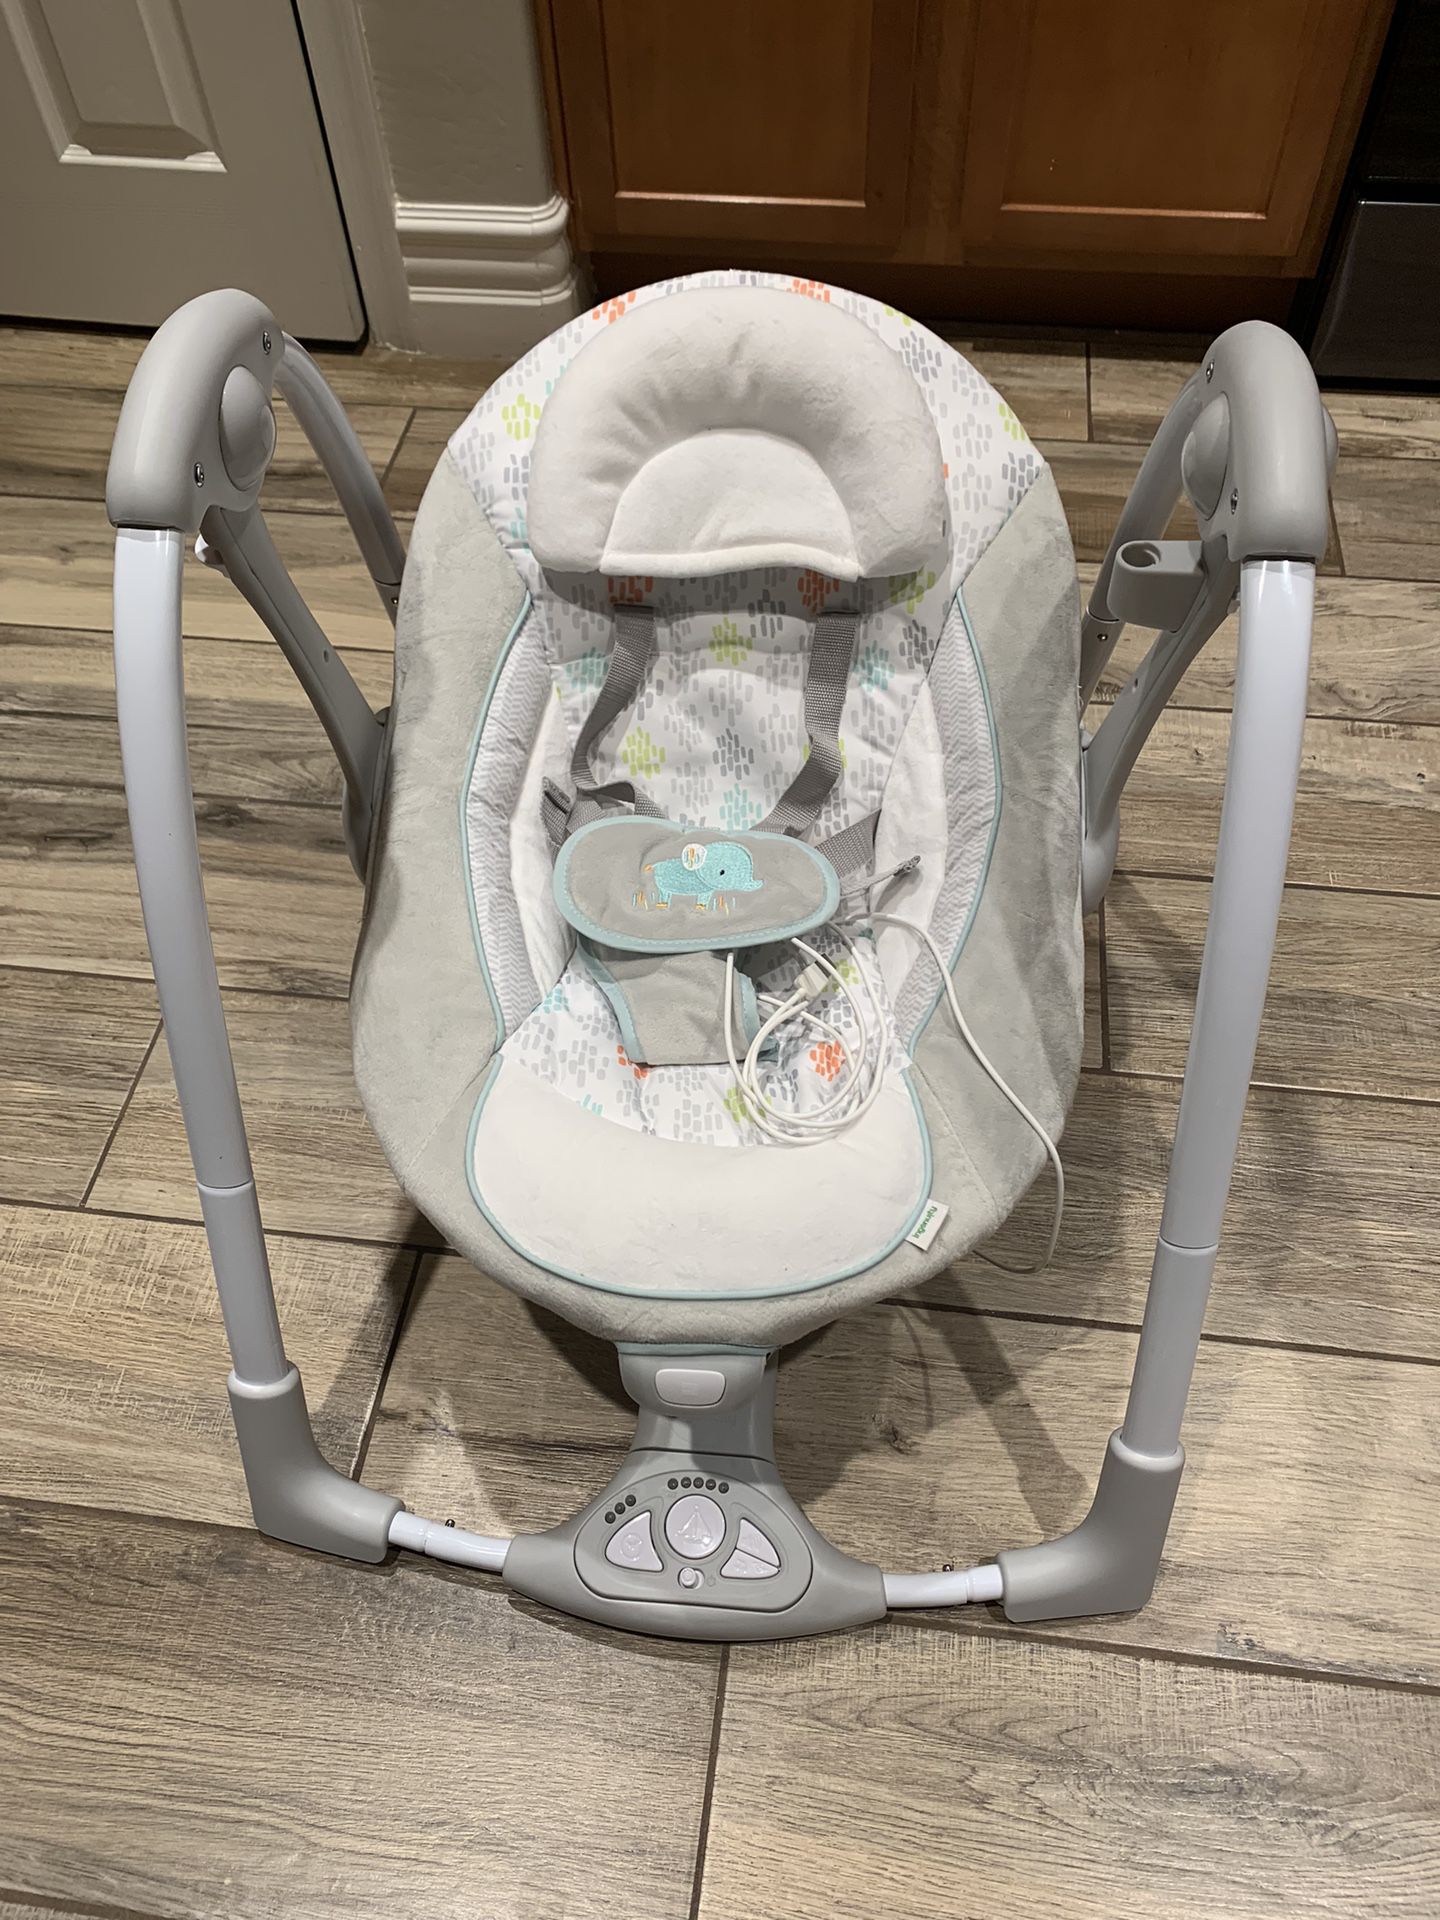 Like New Condition Baby Swing